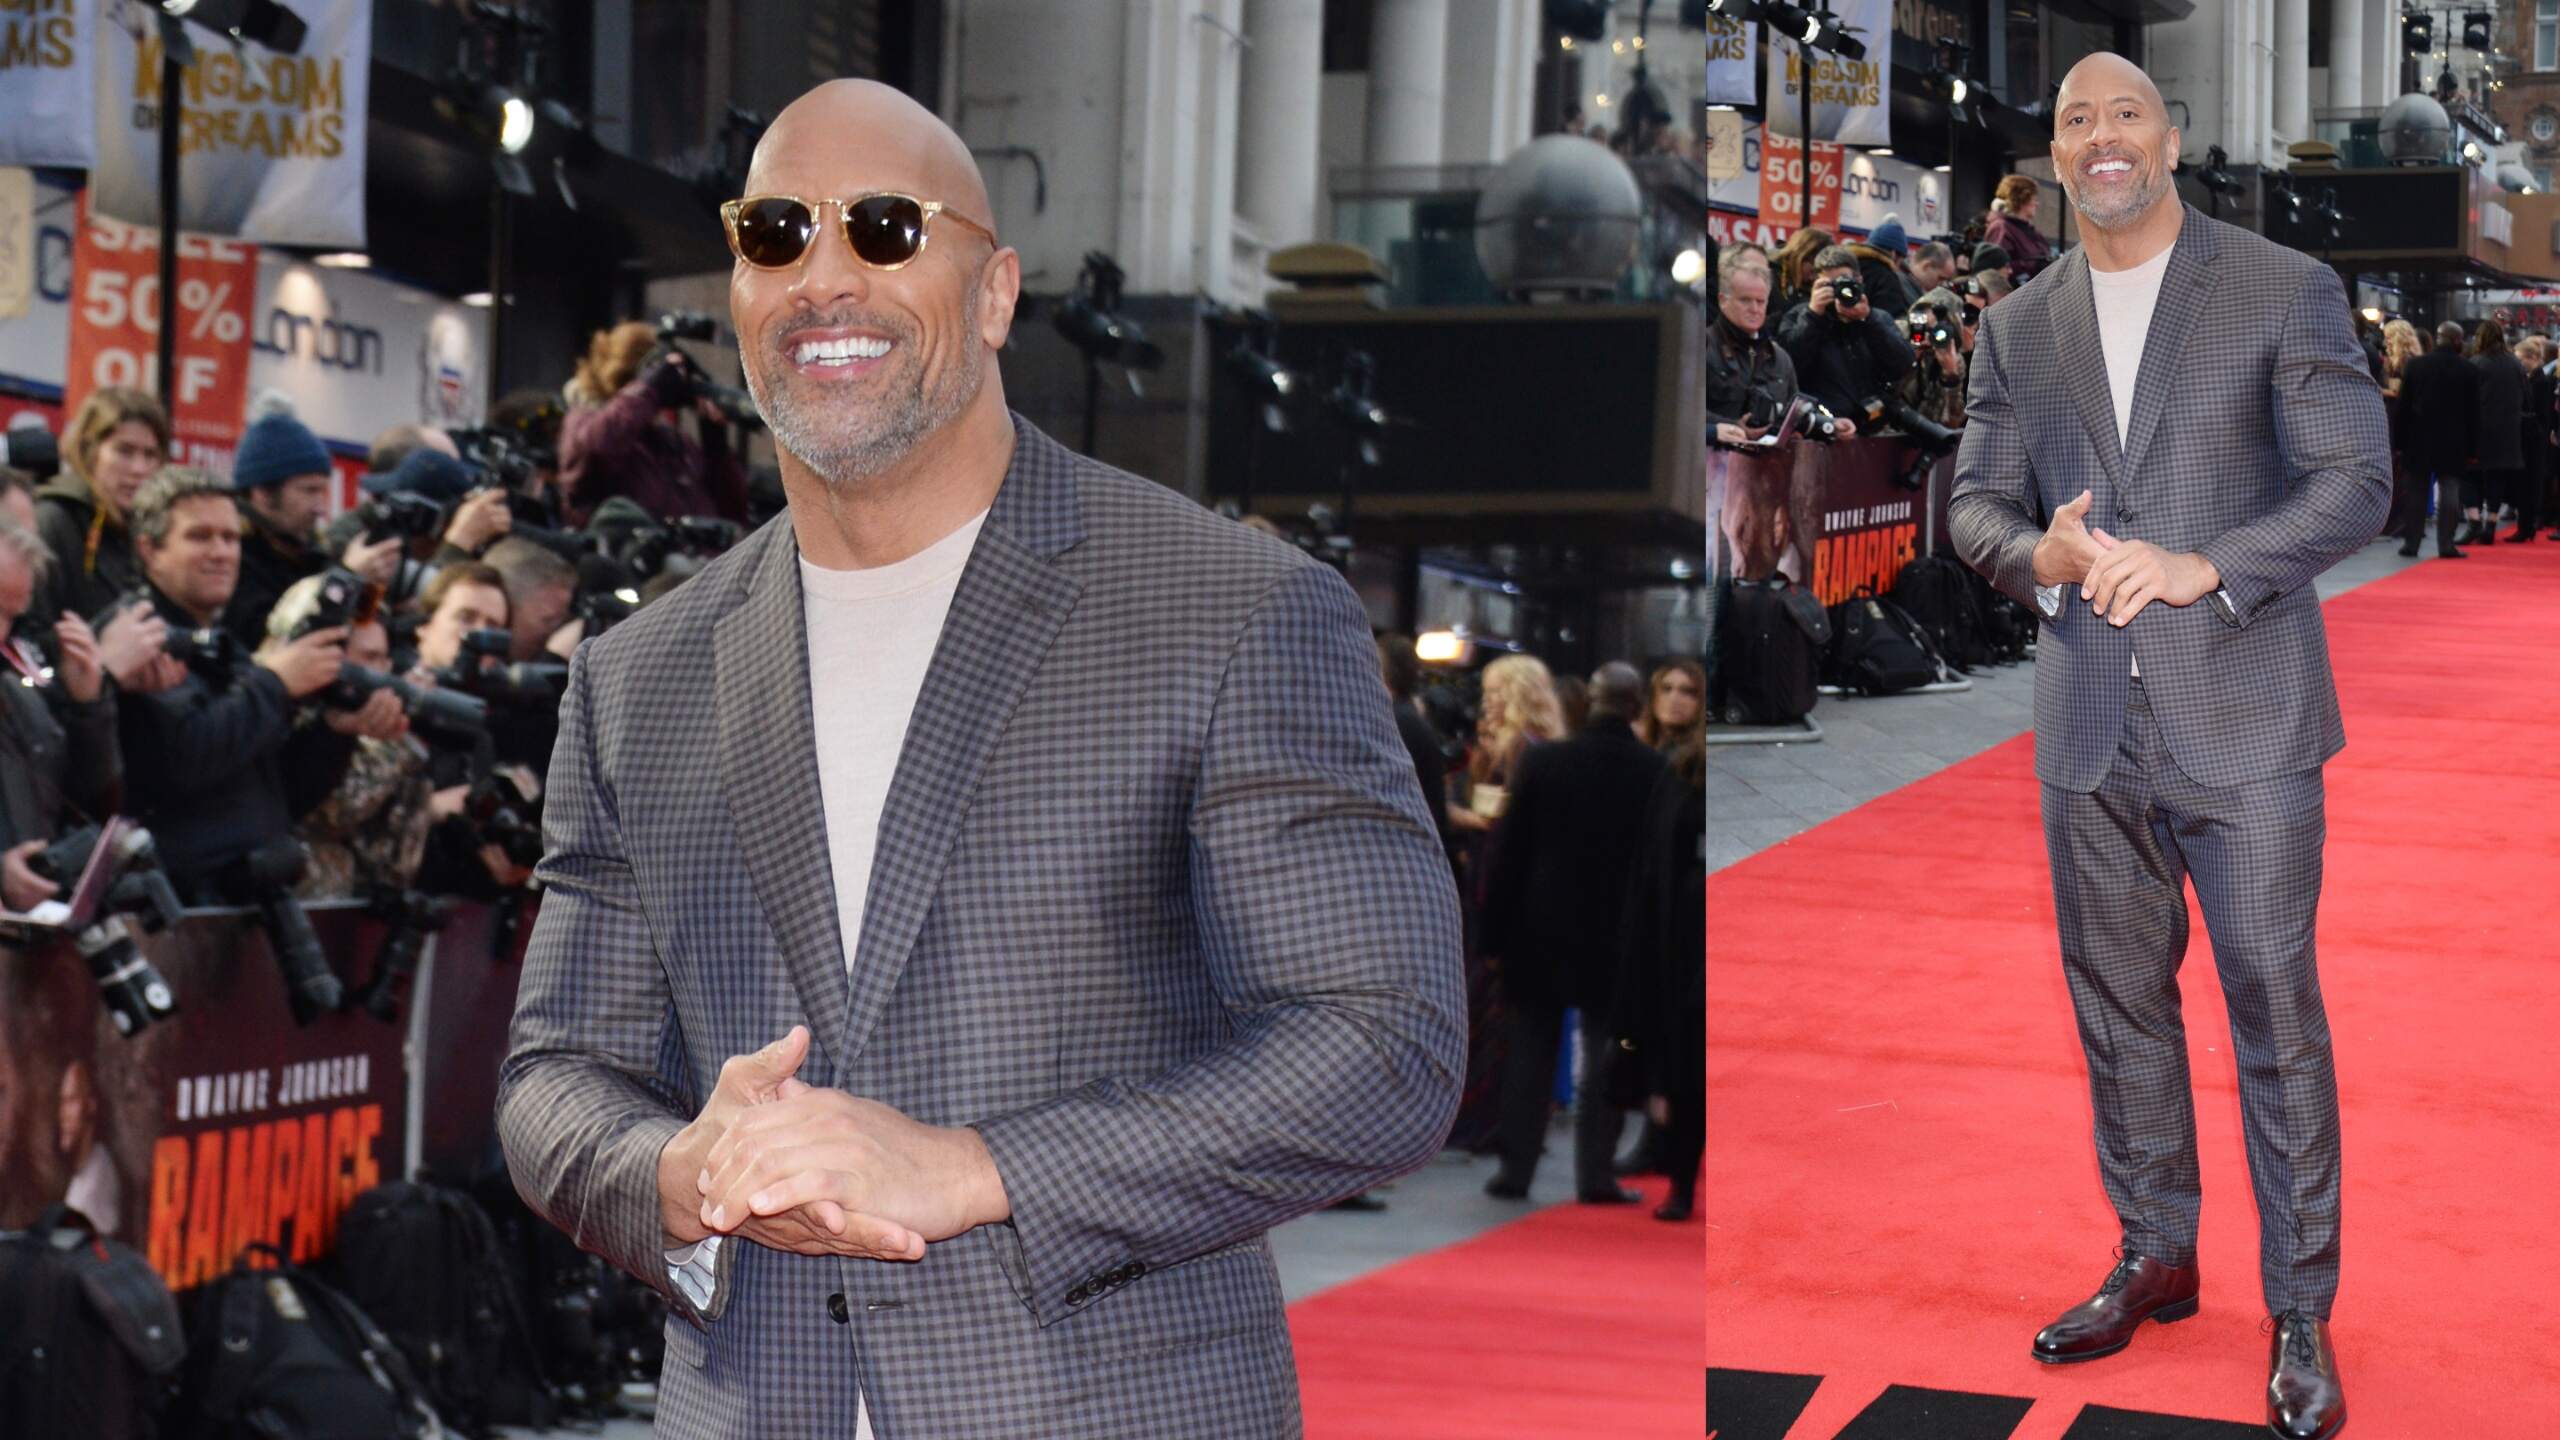 Wearing a checkered gray suit, Dwayne Johnson walks the red carpet at the Rampage premiere